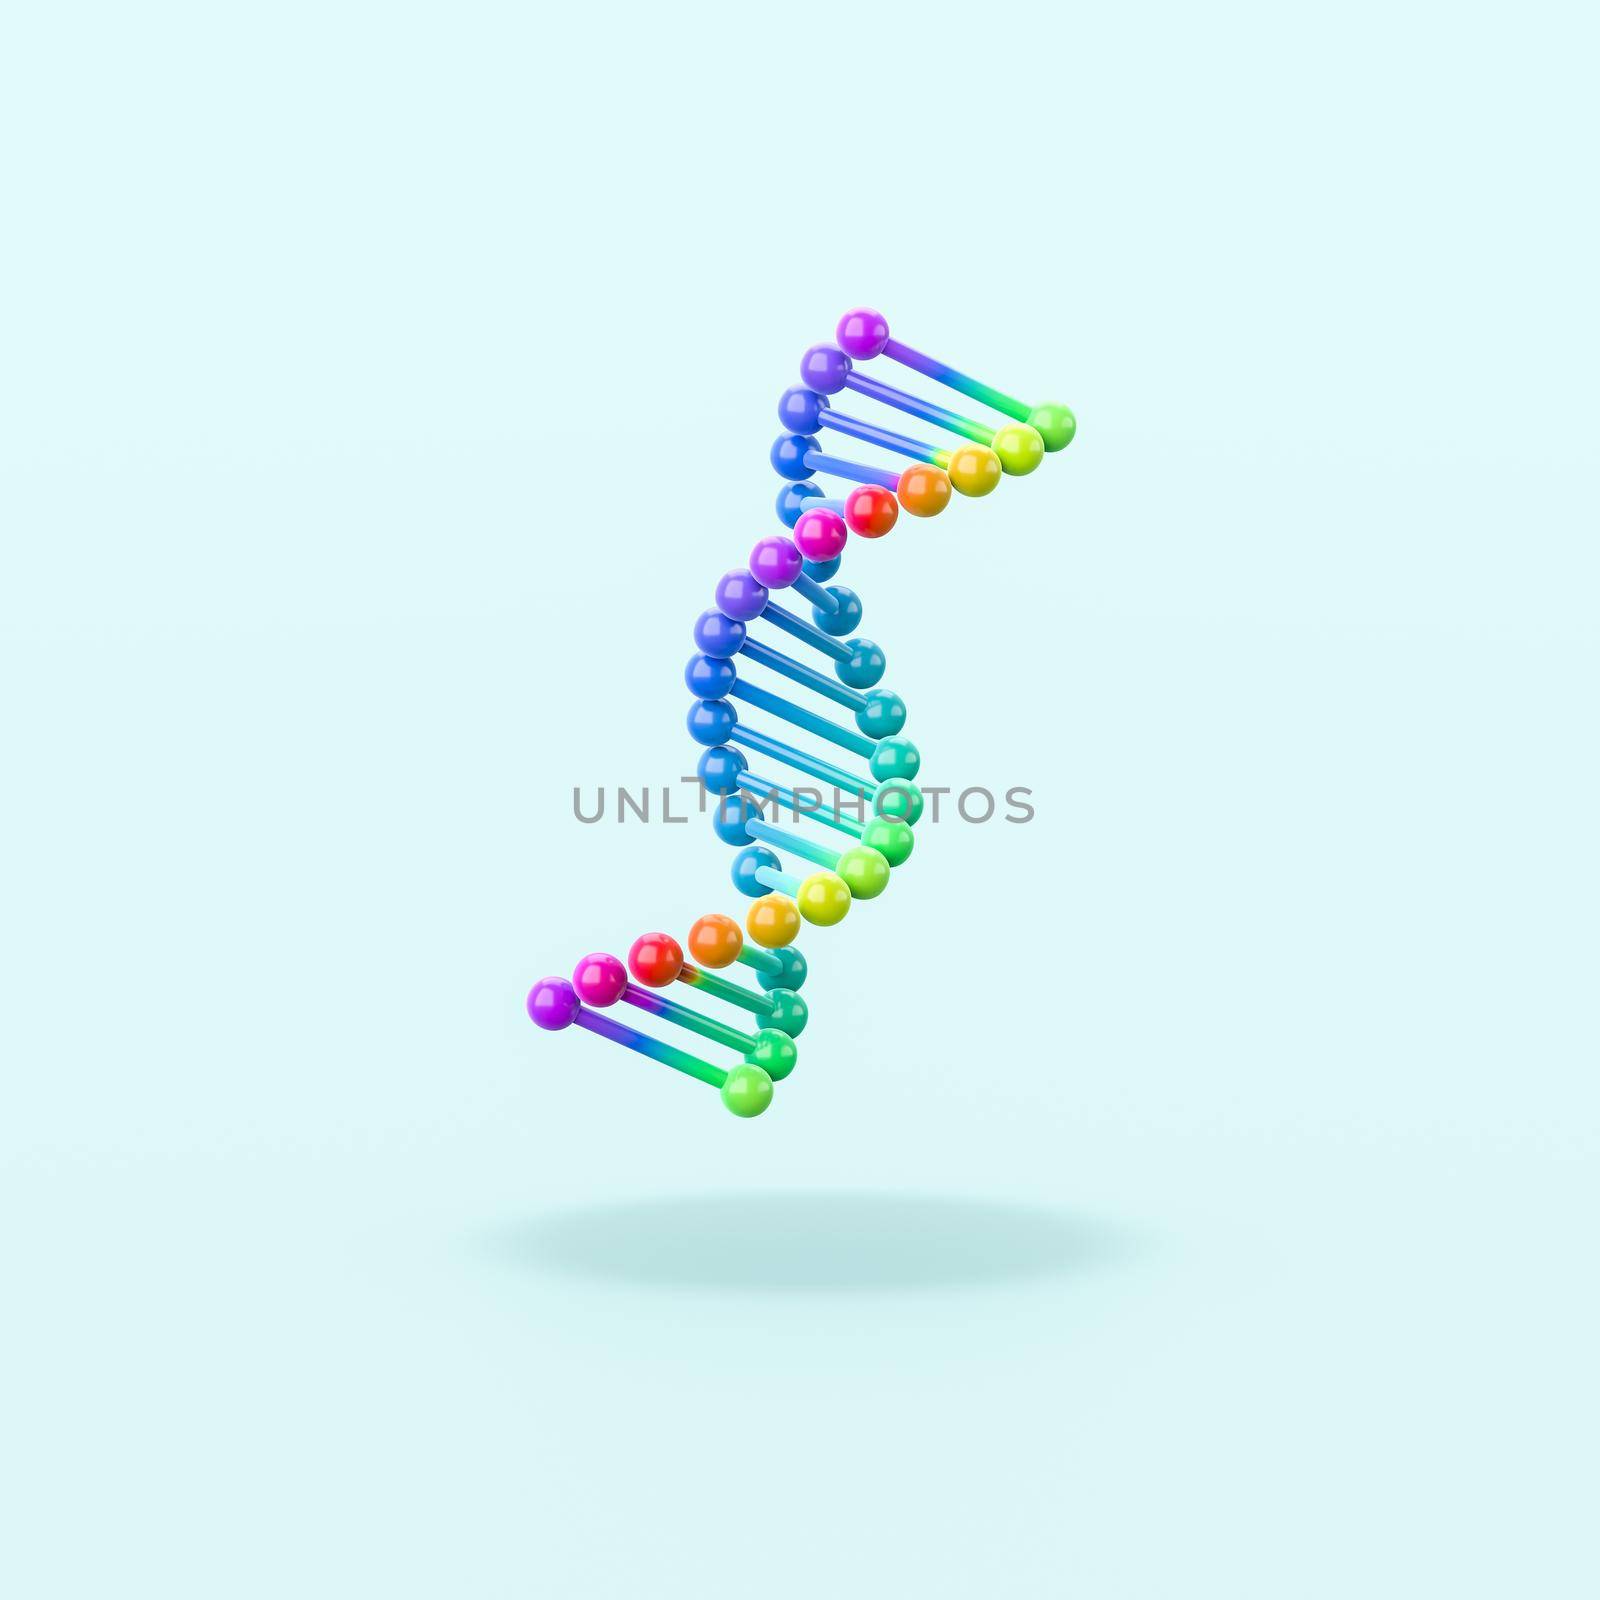 Colorful DNA Chain Isolated on Flat Blue Background with Shadow 3D Illustration